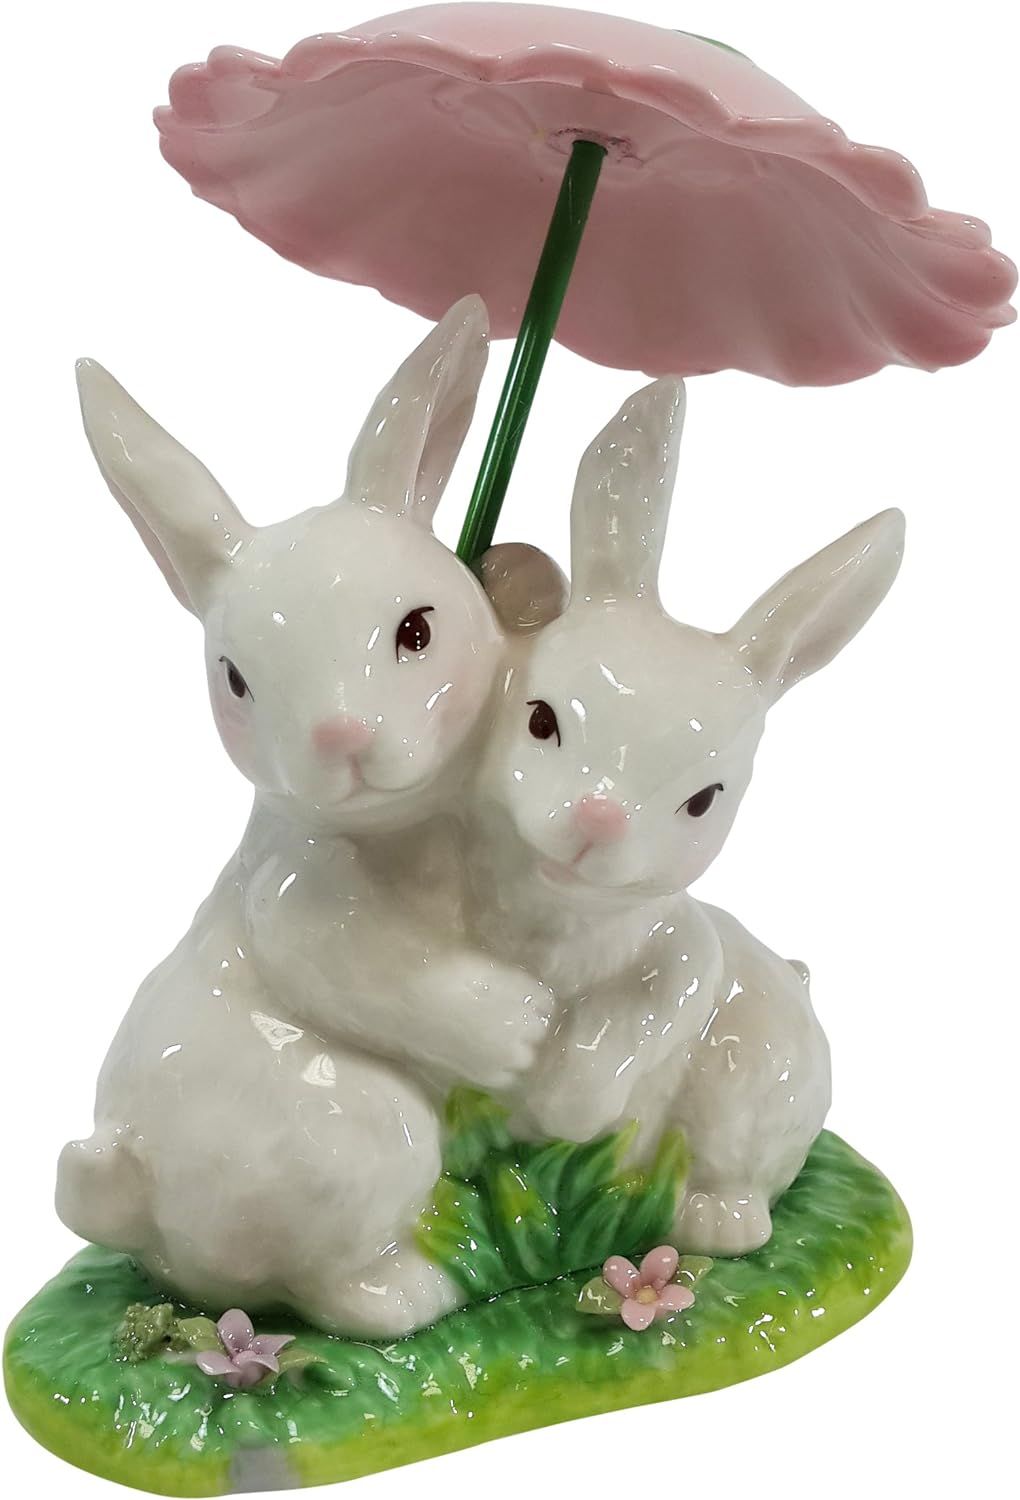 Cosmos Gifts 20877 Porcelain Rabbit Couple Under The Umbrella Figurine, 4-1/4-Inch, Pink | Amazon (US)